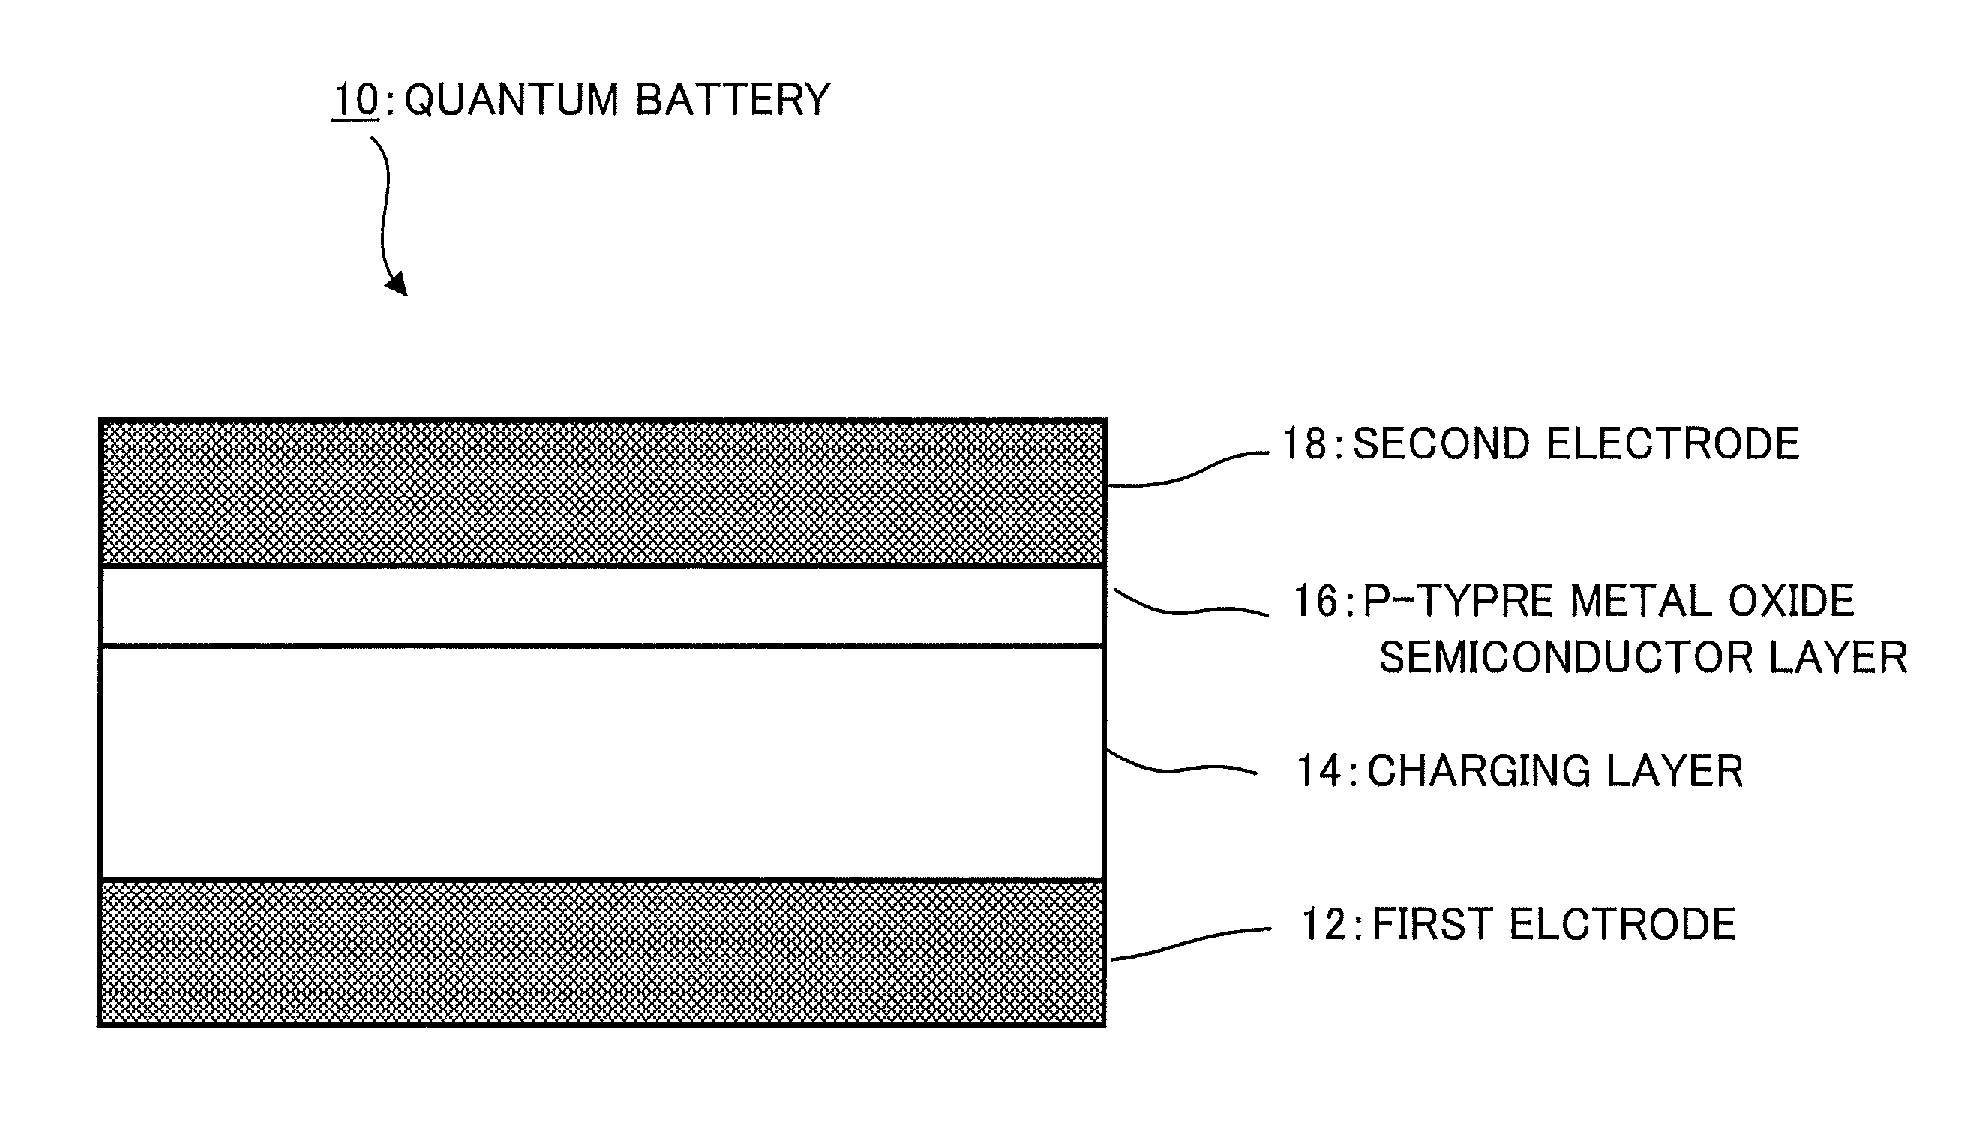 Repeatedly chargeable and dischargeable quantum battery